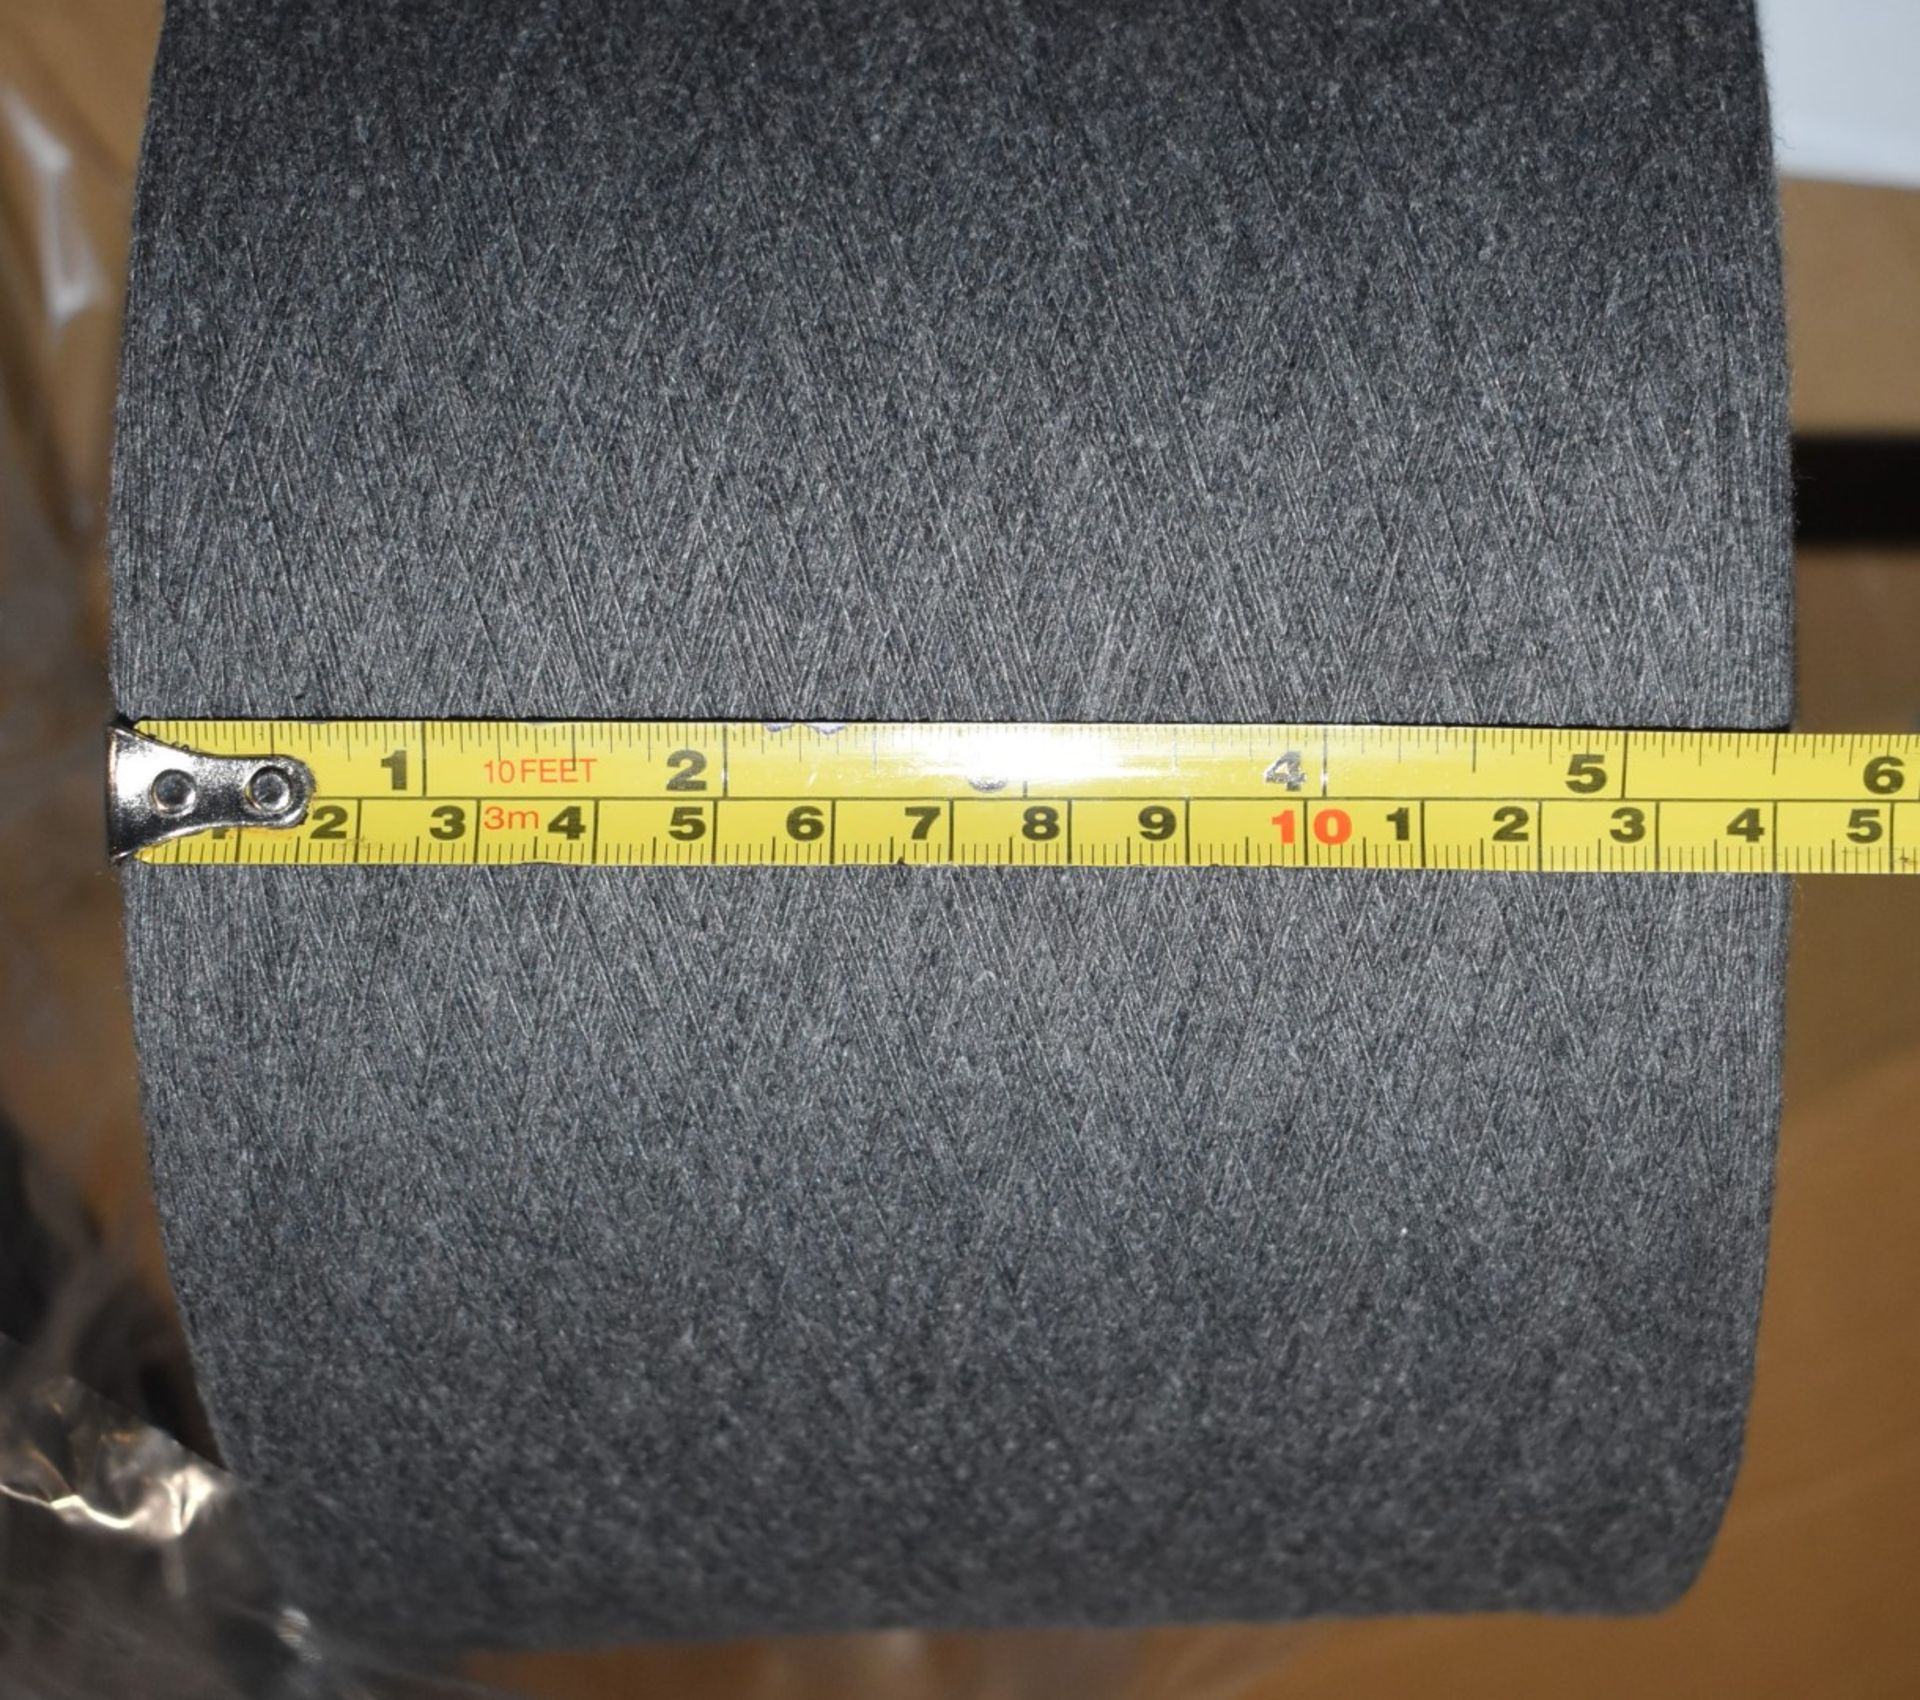 4 x Cones of 1/13 MicroCotton Knitting Yarn - Mid Grey - Approx Weight: 2,500g - New Stock ABL Yarn - Image 10 of 17